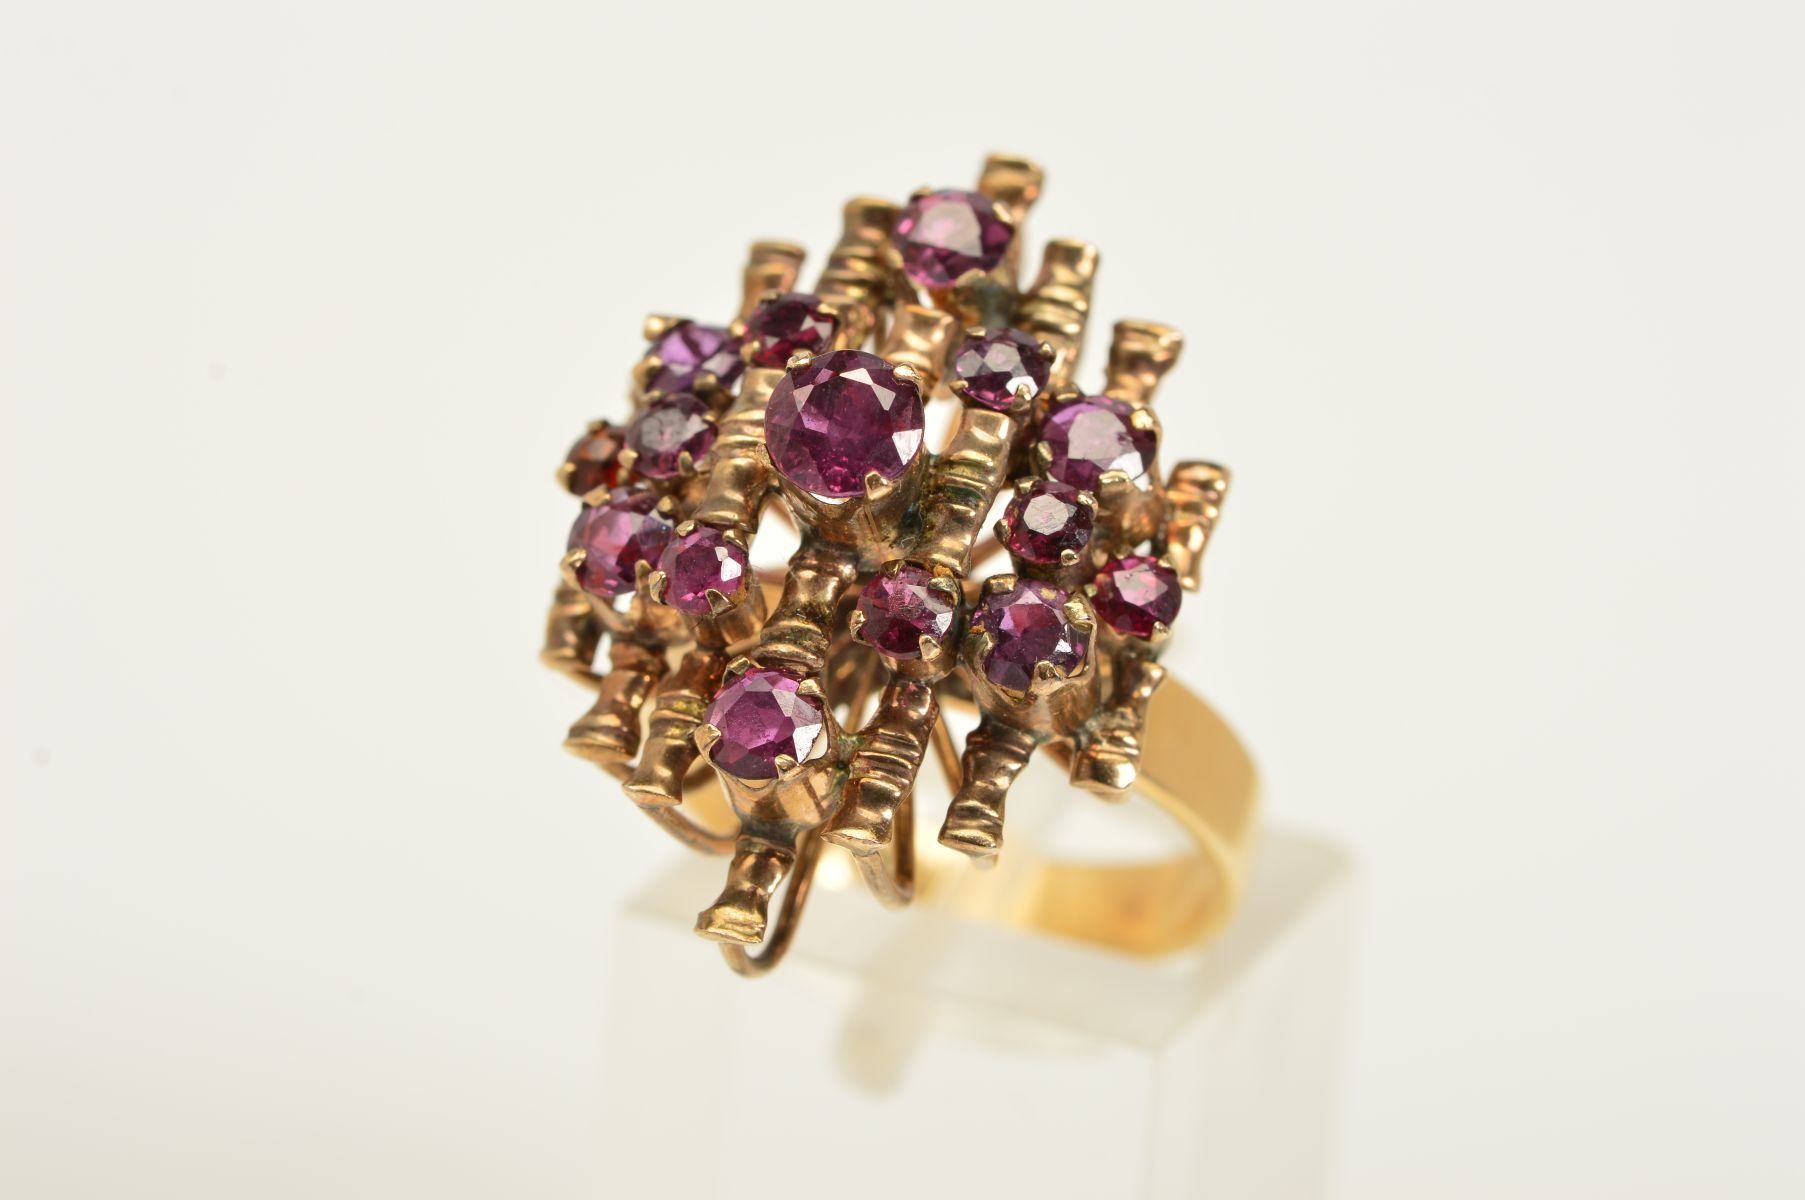 A GARNET DRESS RING, a tiered ring with open metal work set with fifteen circular garnets upon a